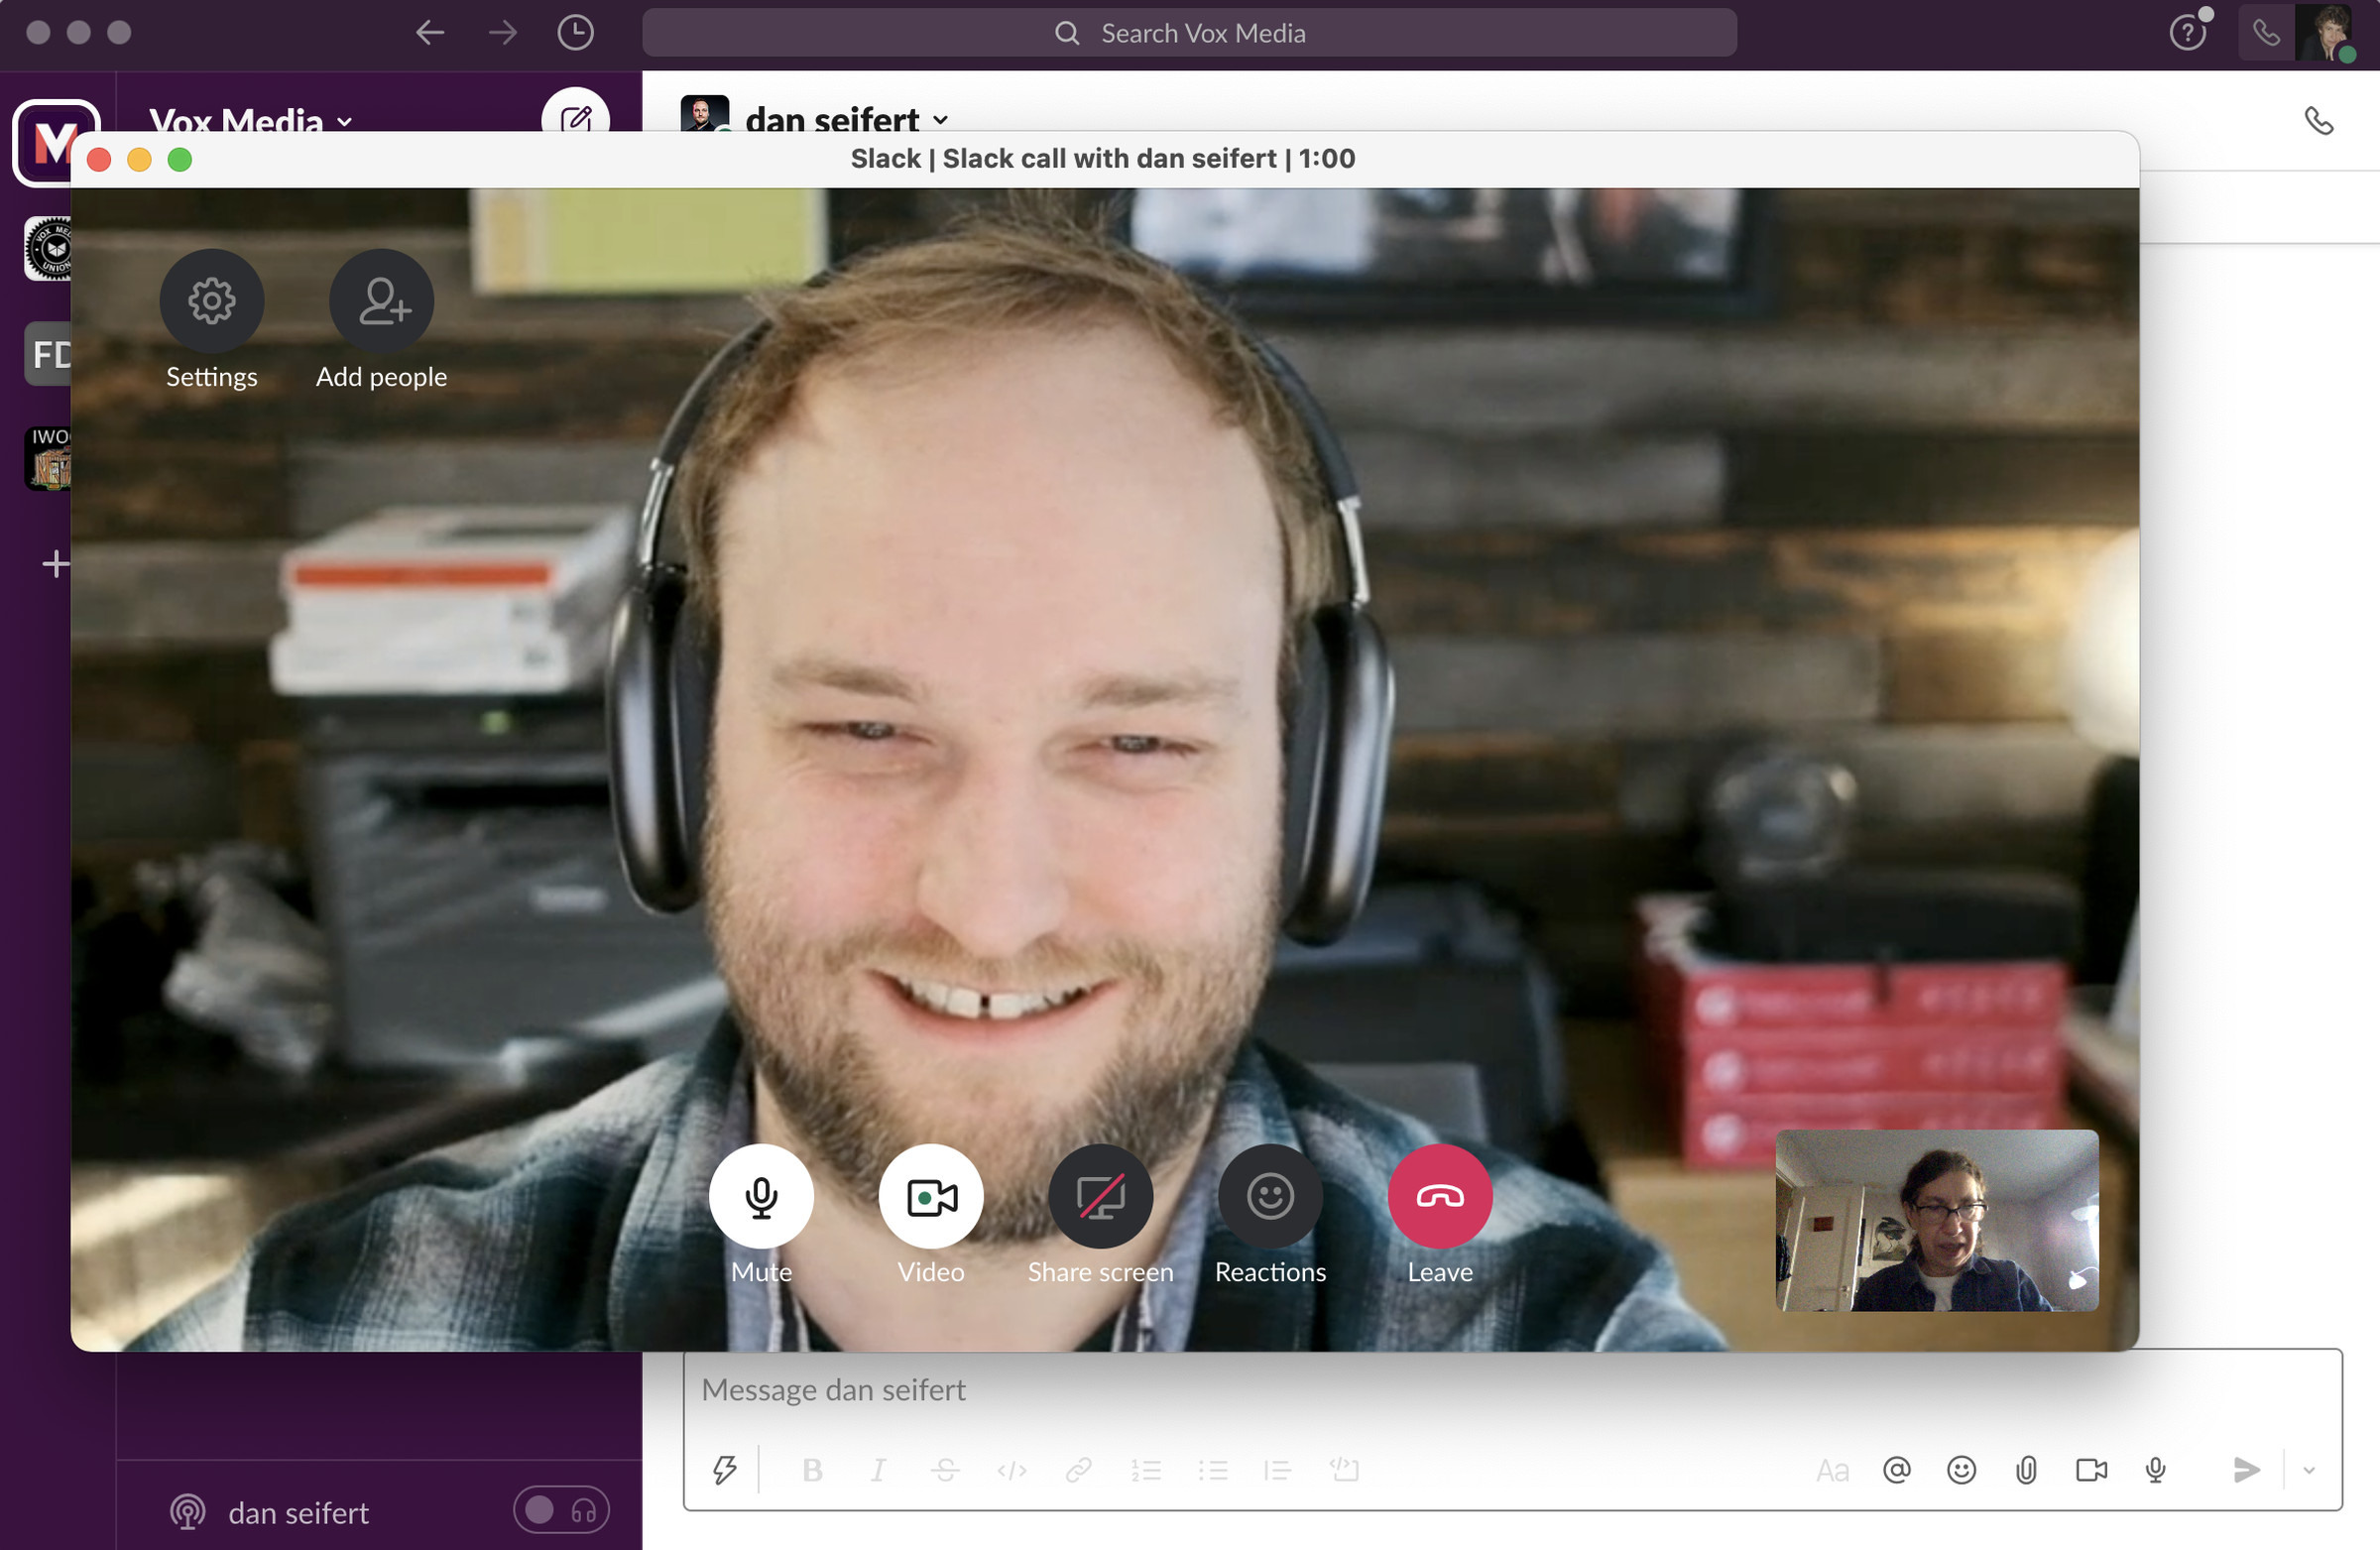 Once in an audio chat, tap on the camera symbol to turn it into a video chat.